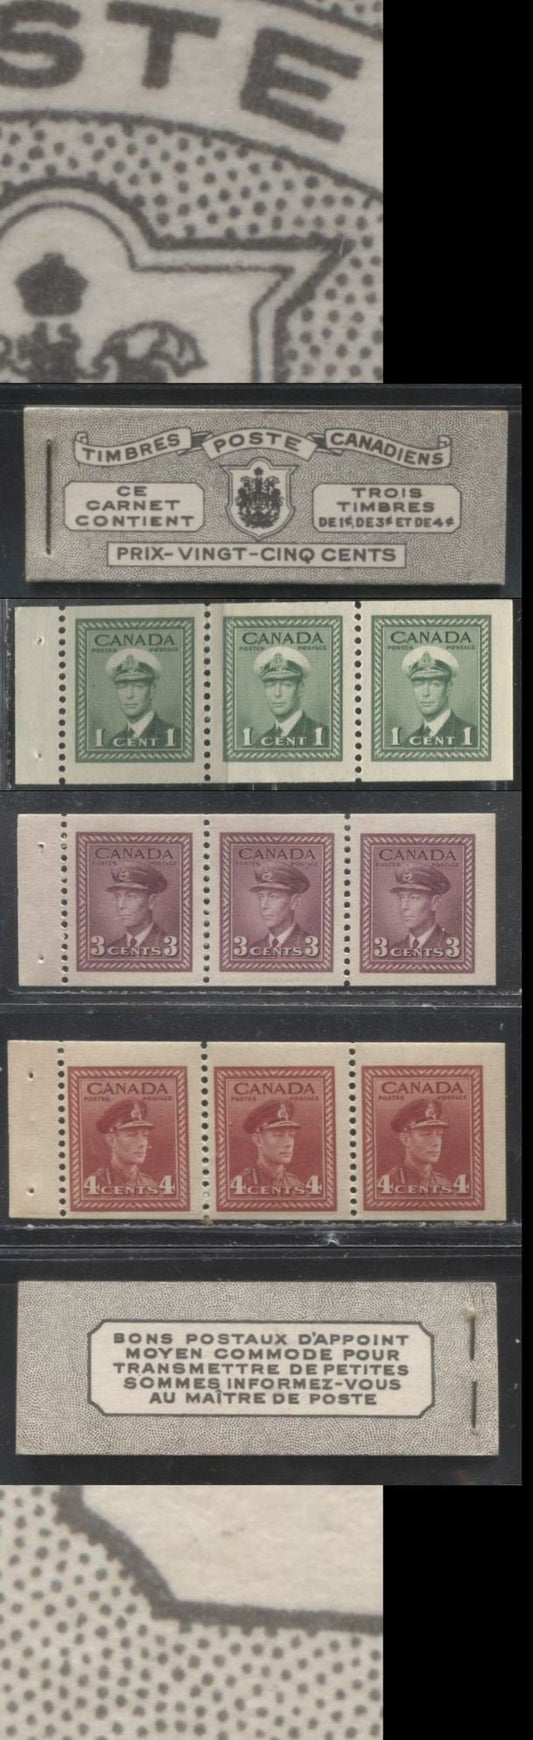 Lot 204 Canada #BK38a 1942-1949 War Issue Complete 25c, French Booklet Containing 1 Pane Each of 3 of 1c Green, 3c Rosy Plum and 4c Carmine Red, Harris Front Cover Type Vc , Back Cover Jviii, 7c & 6c Rate Page, Ribbed Paper